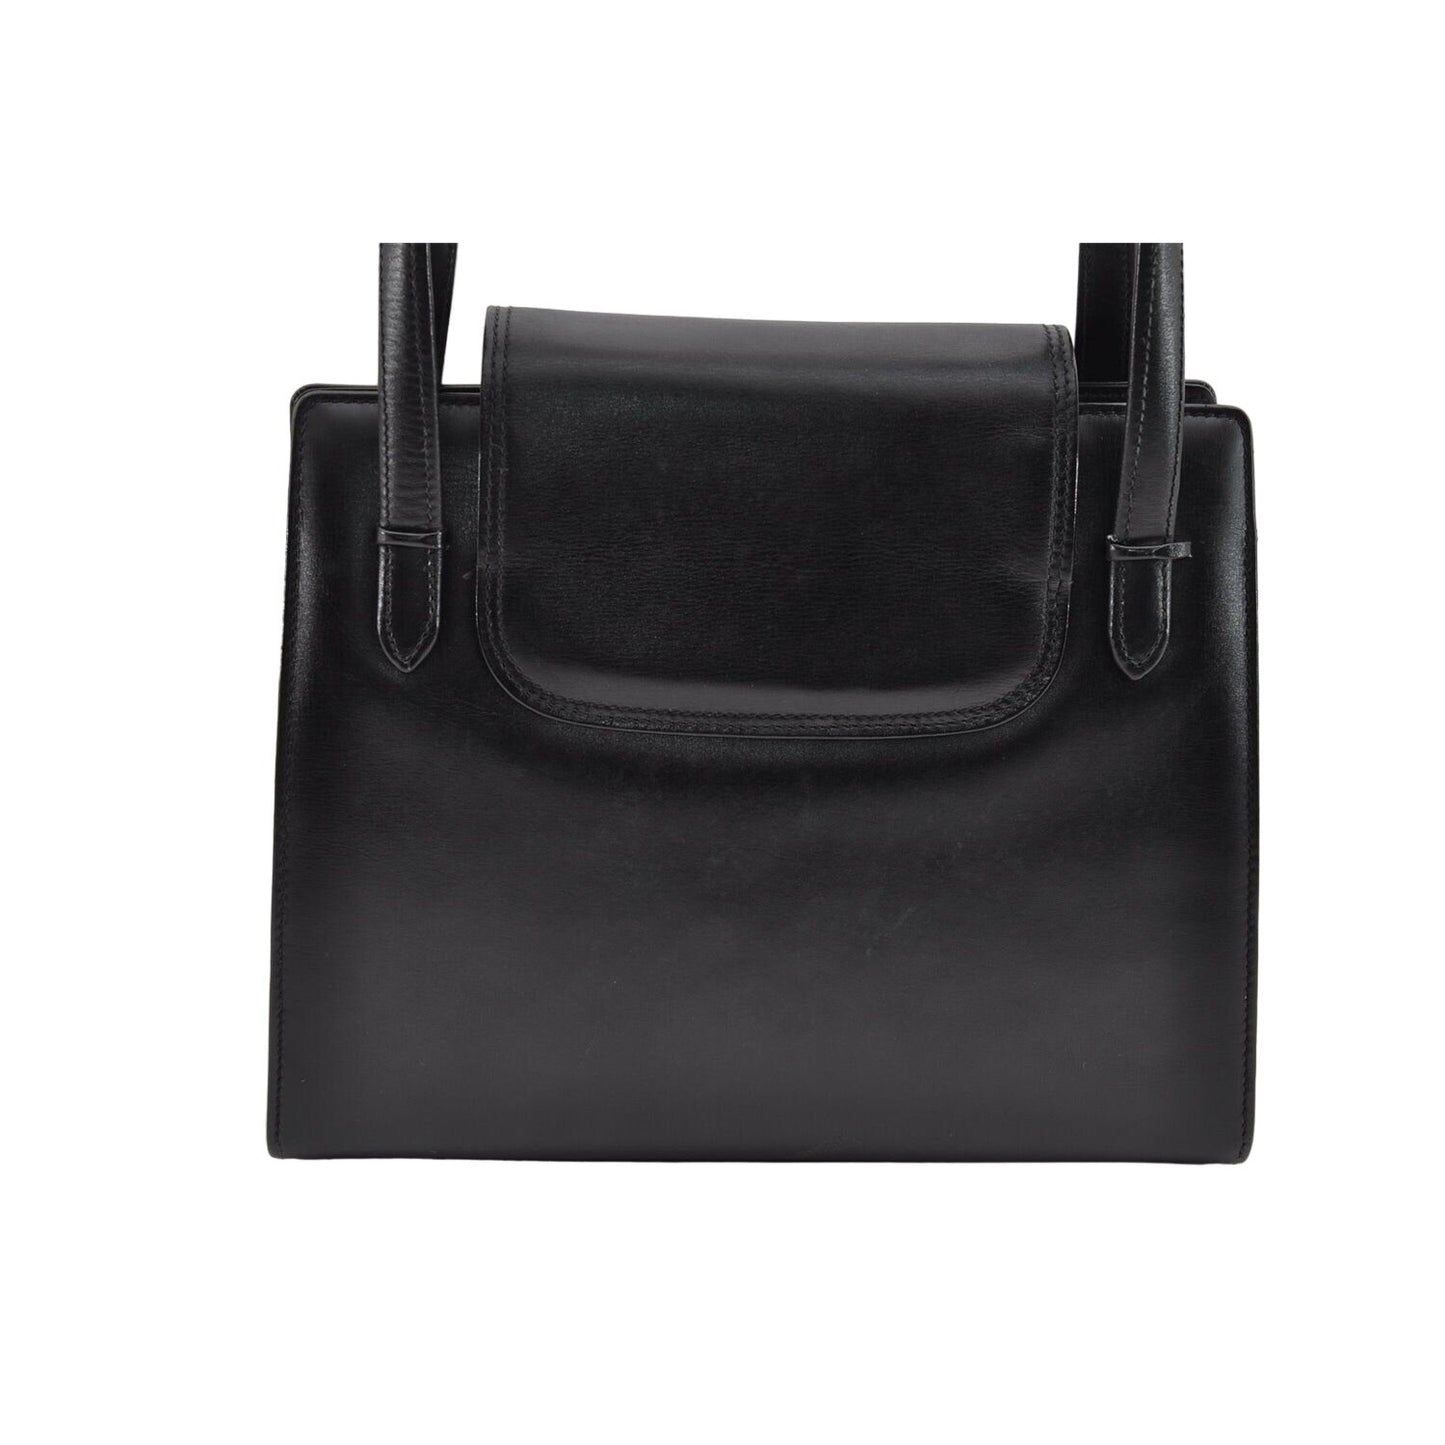 Gucci black leather top handle Kelly bag with blue lapis